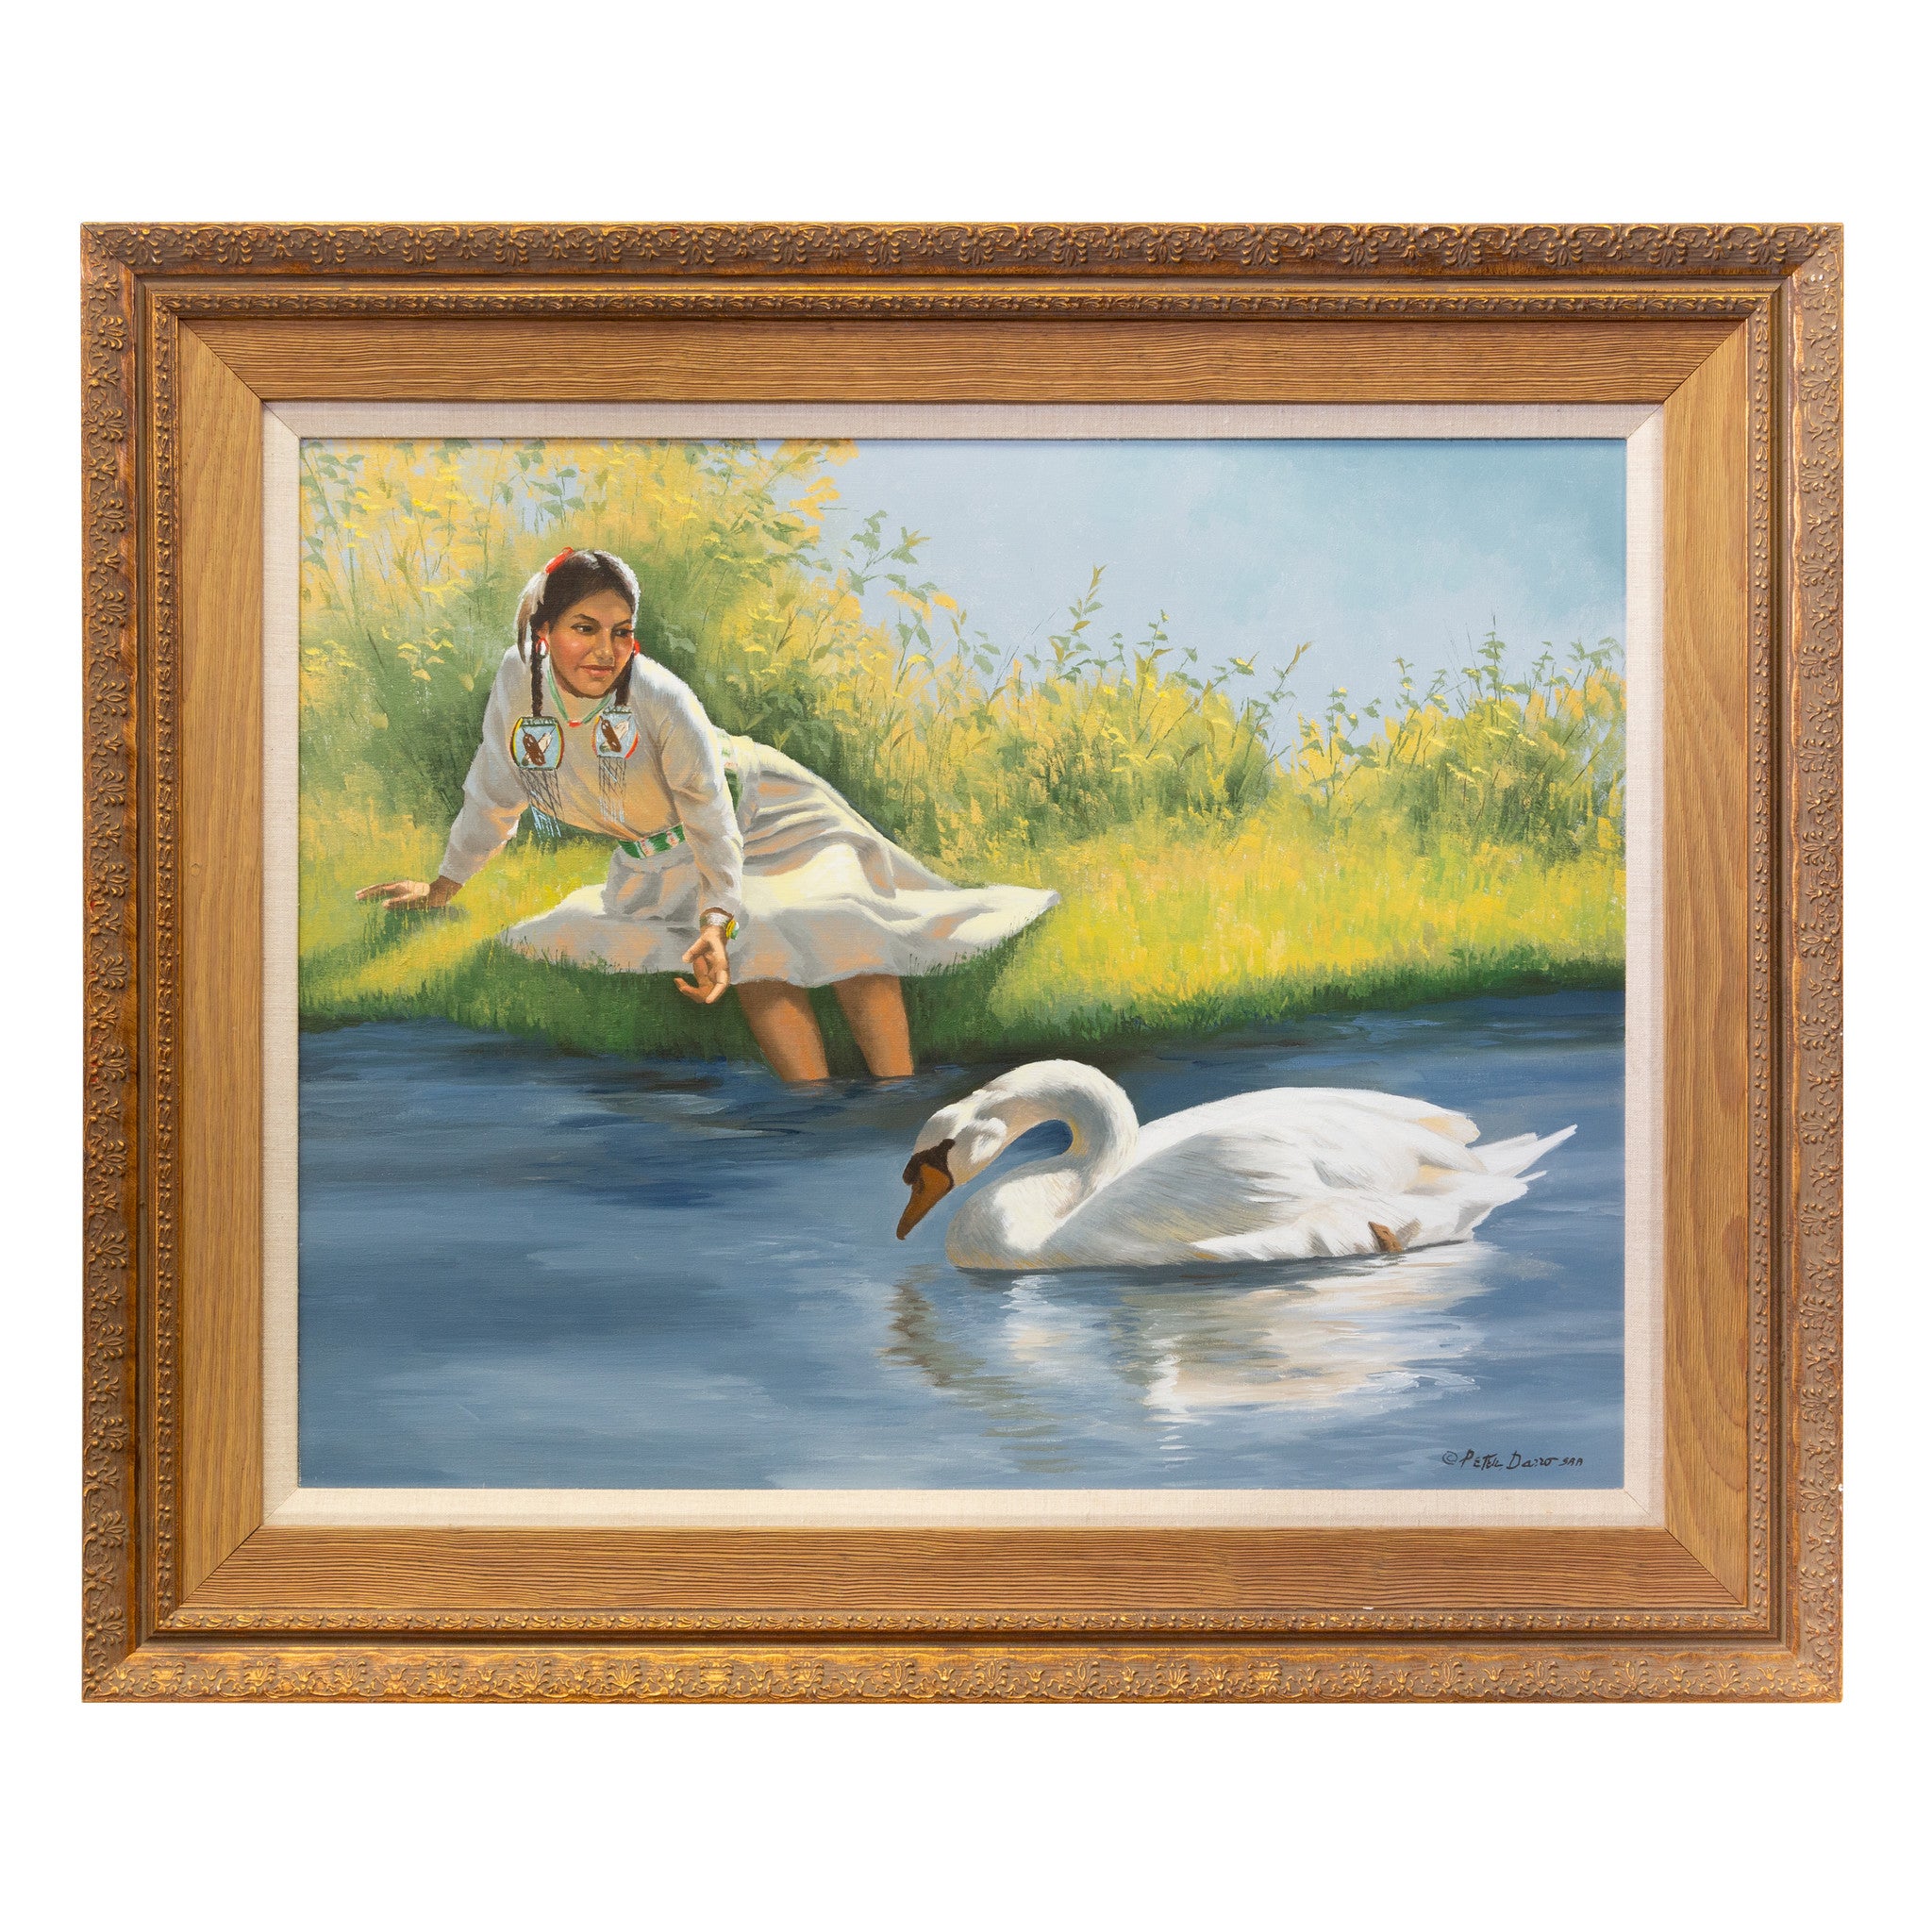 "Girl with Swan" by Peter Darro